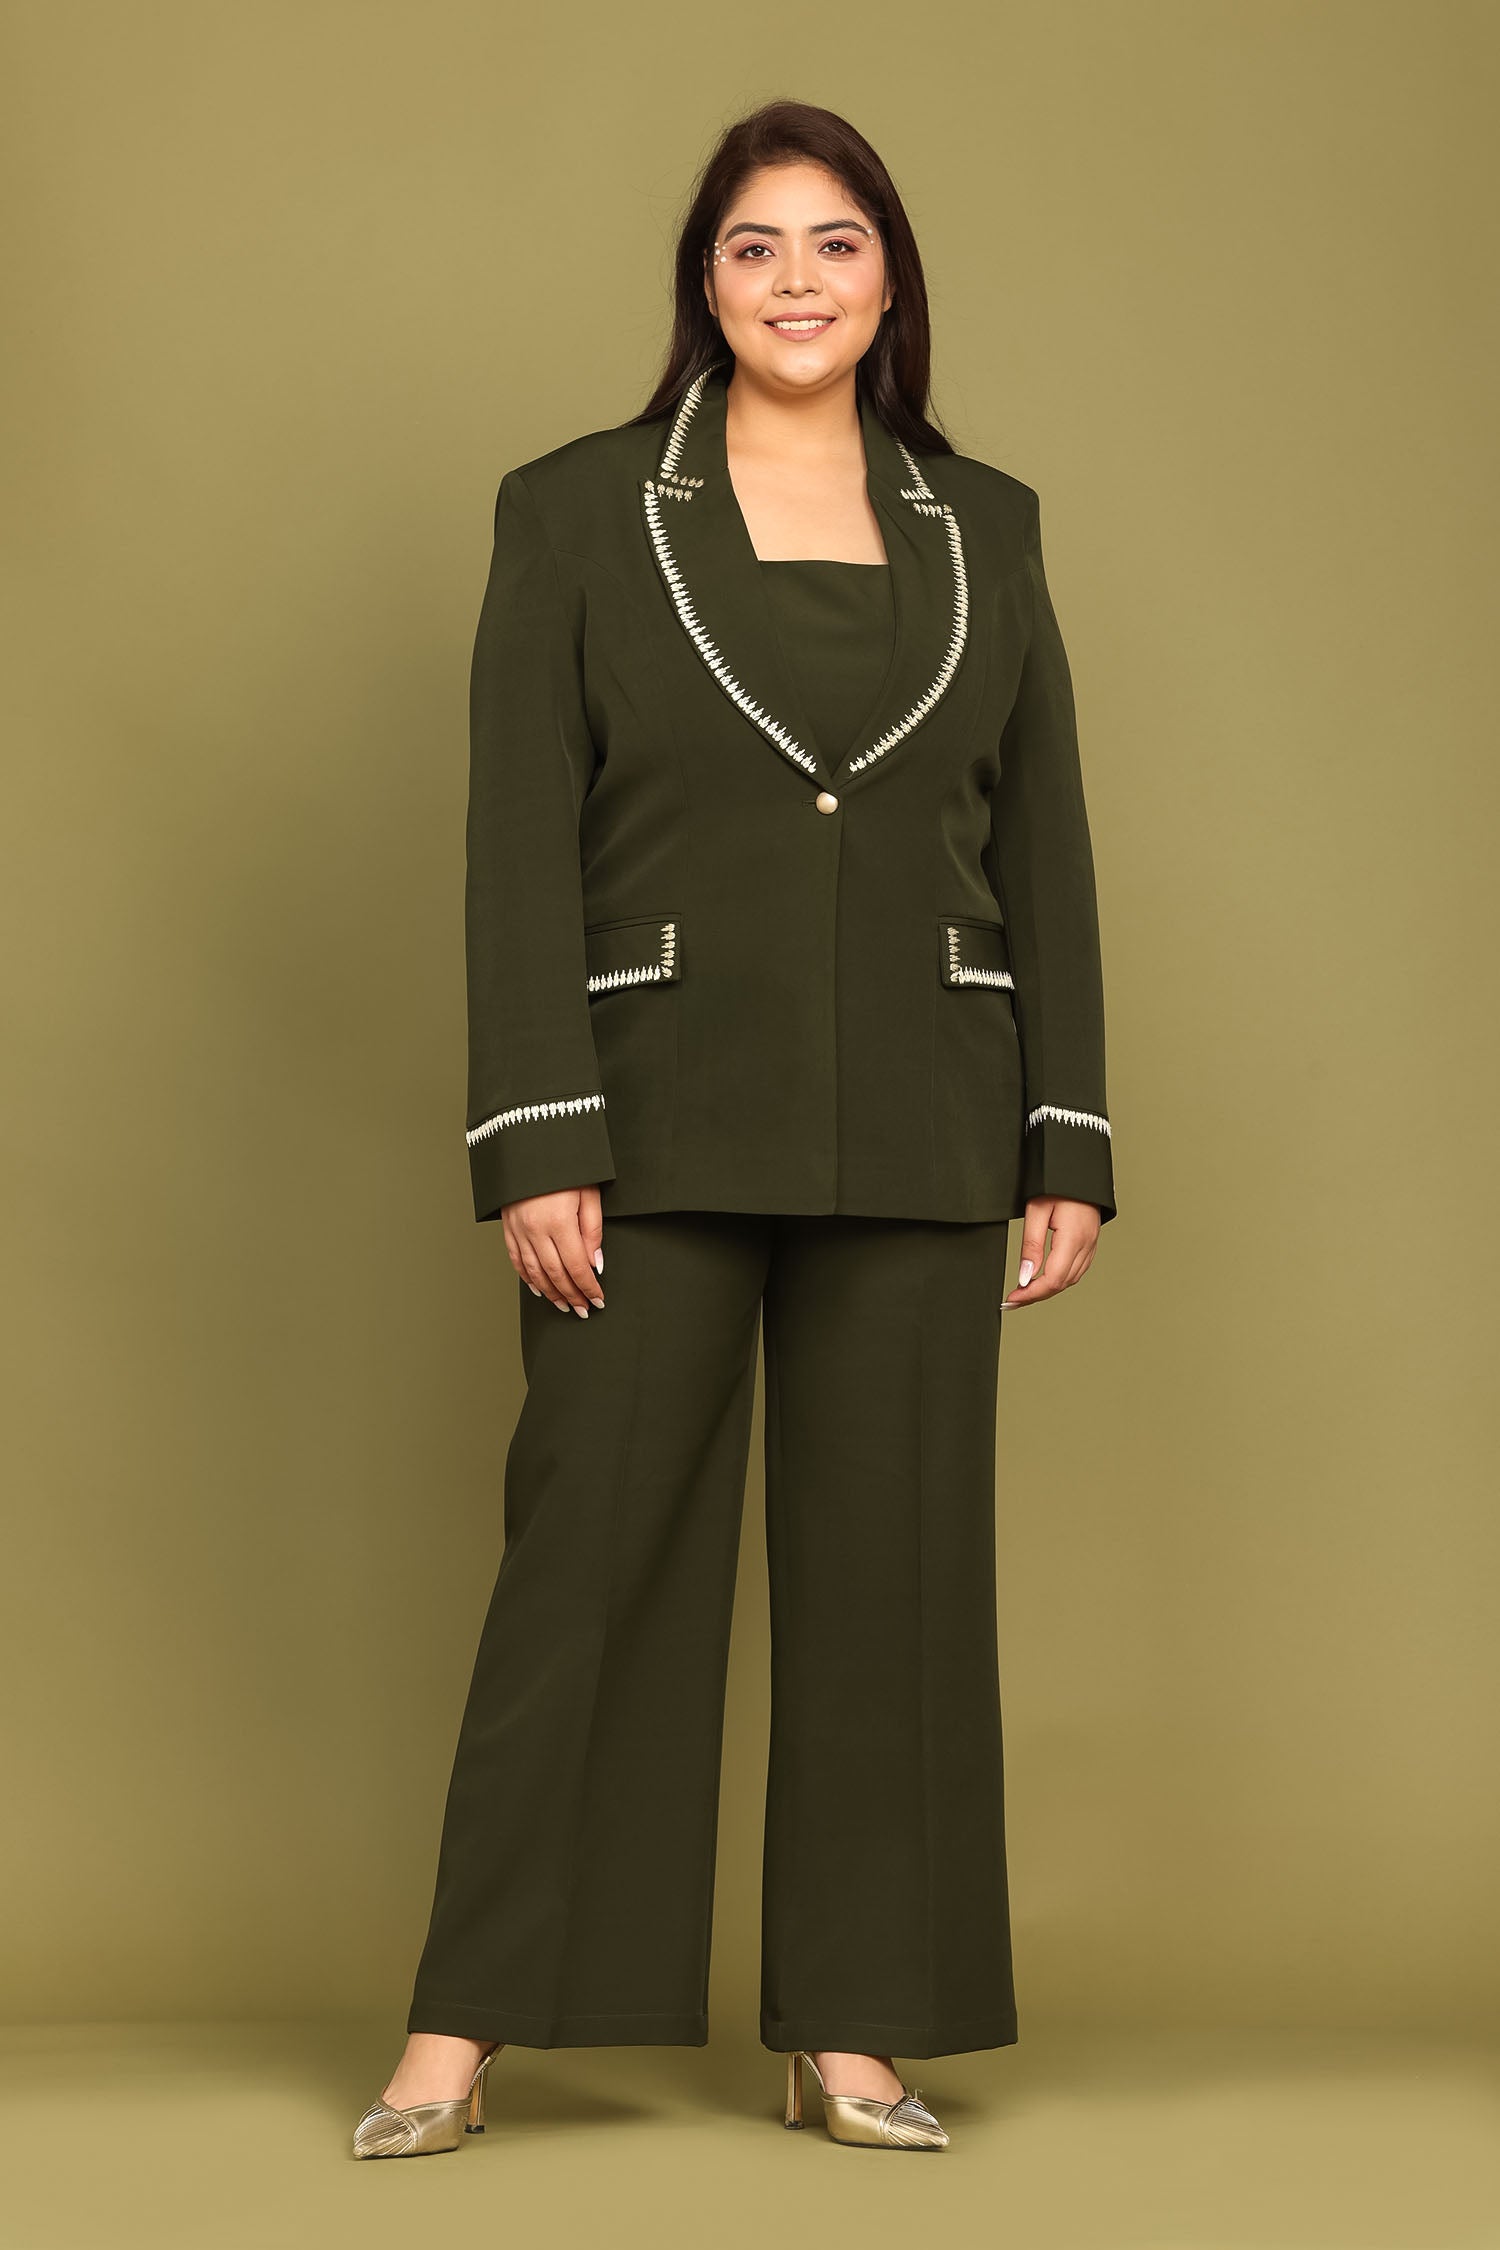 Petal Embroidered Juniper Green Blazer with Crop Top and Flared Pants